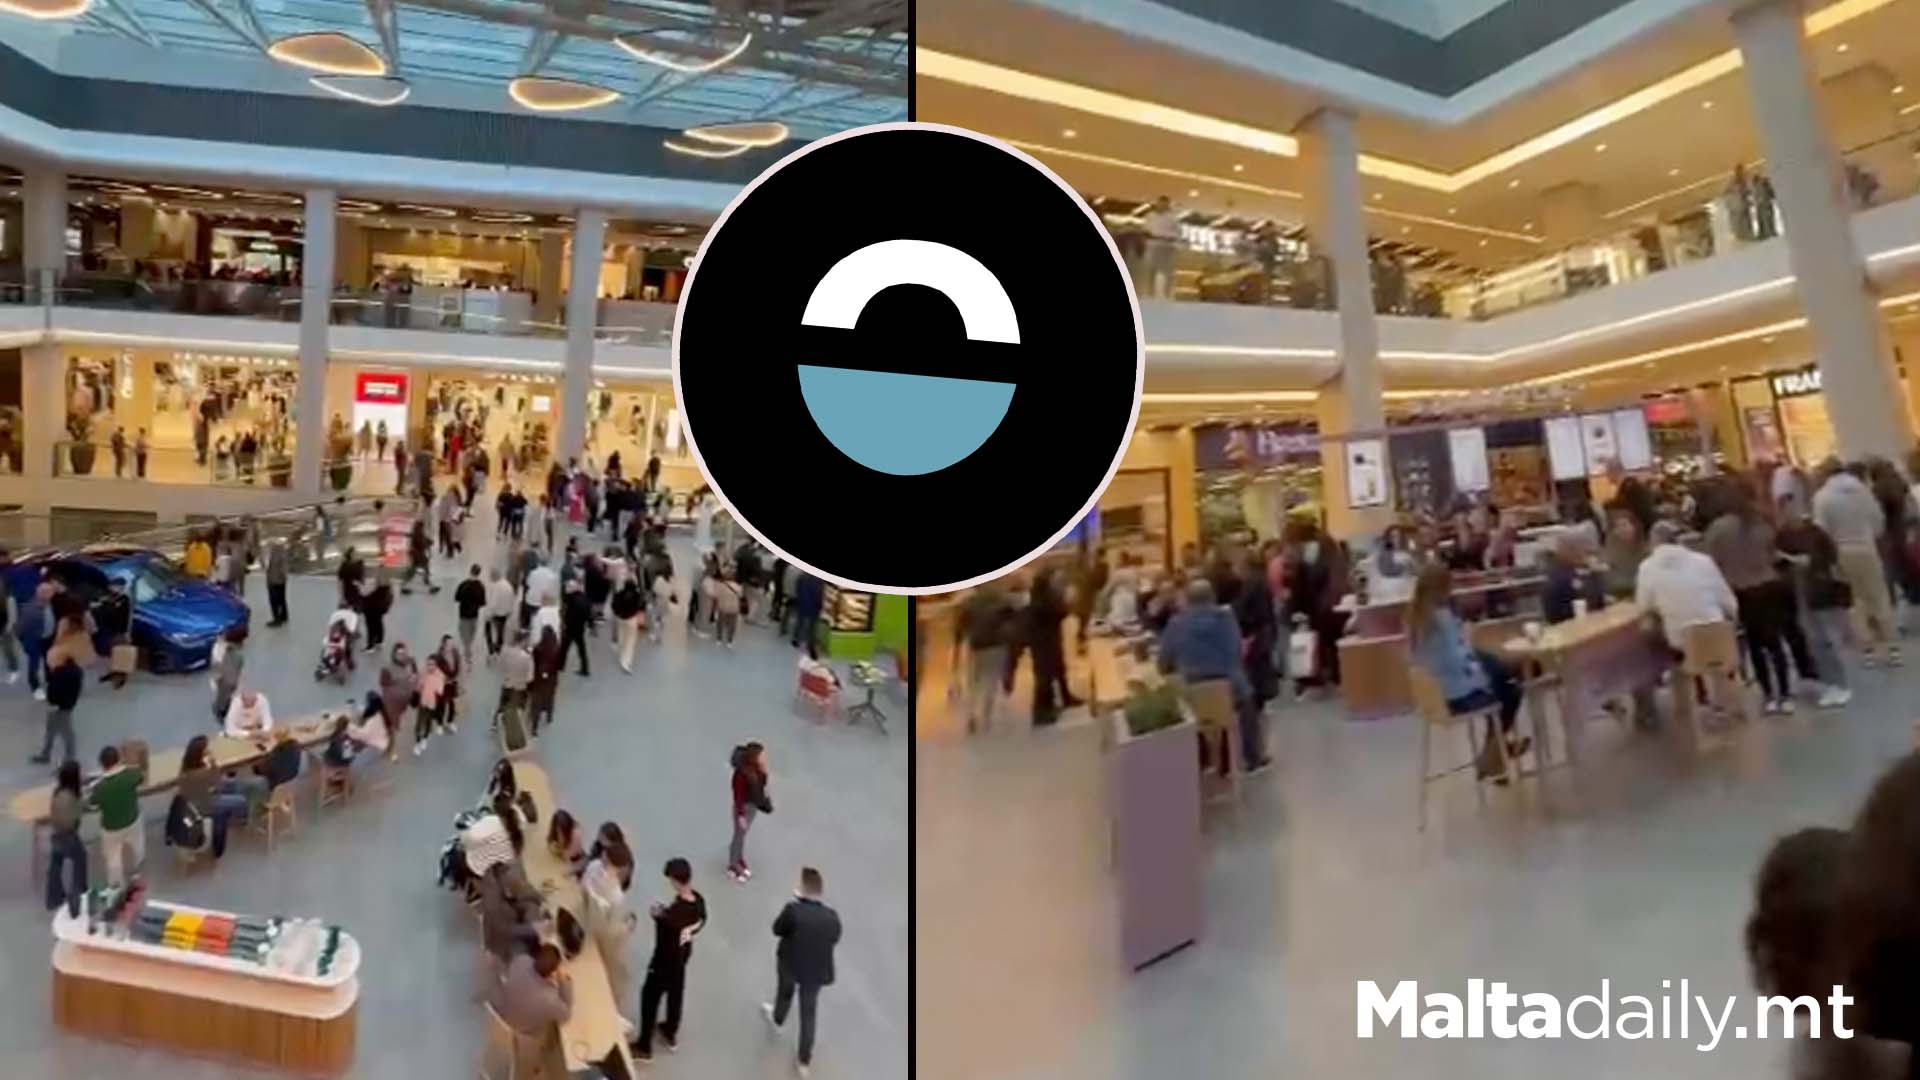 Thousands Flock To Newly Opened Shoreline Mall